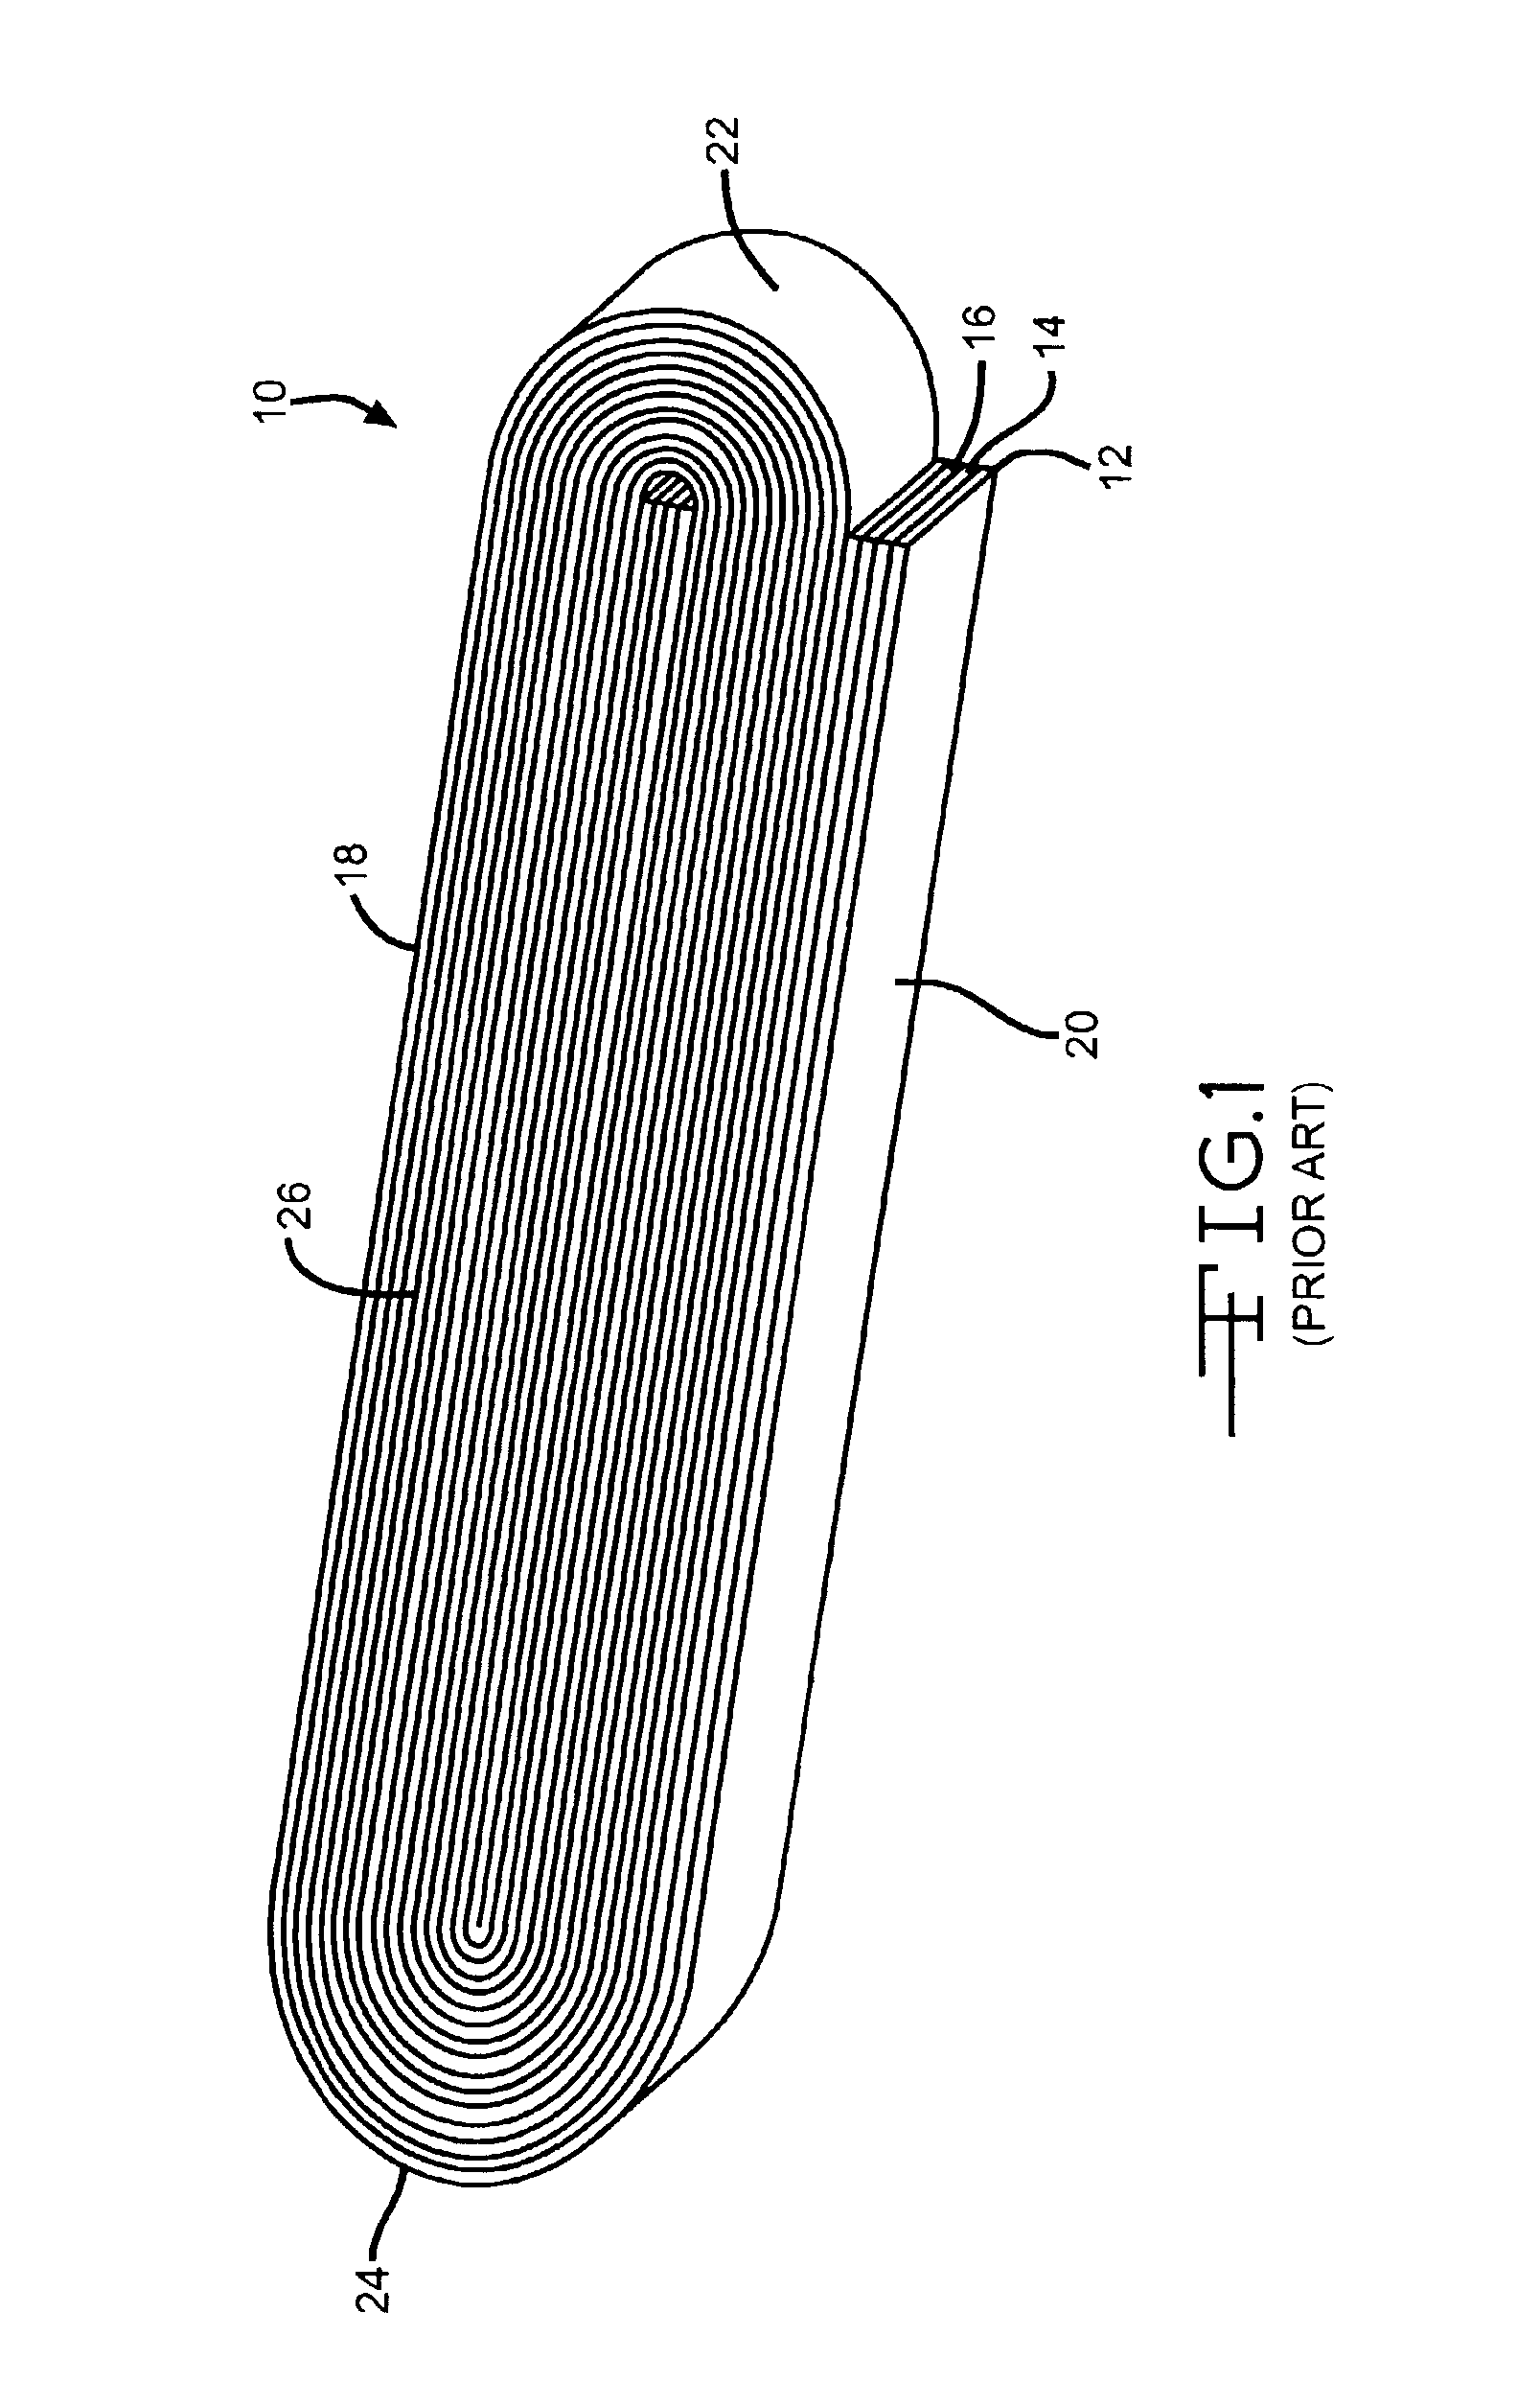 Electrochemical cell having a multiplate electrode assembly housed in an irregularly shaped casing